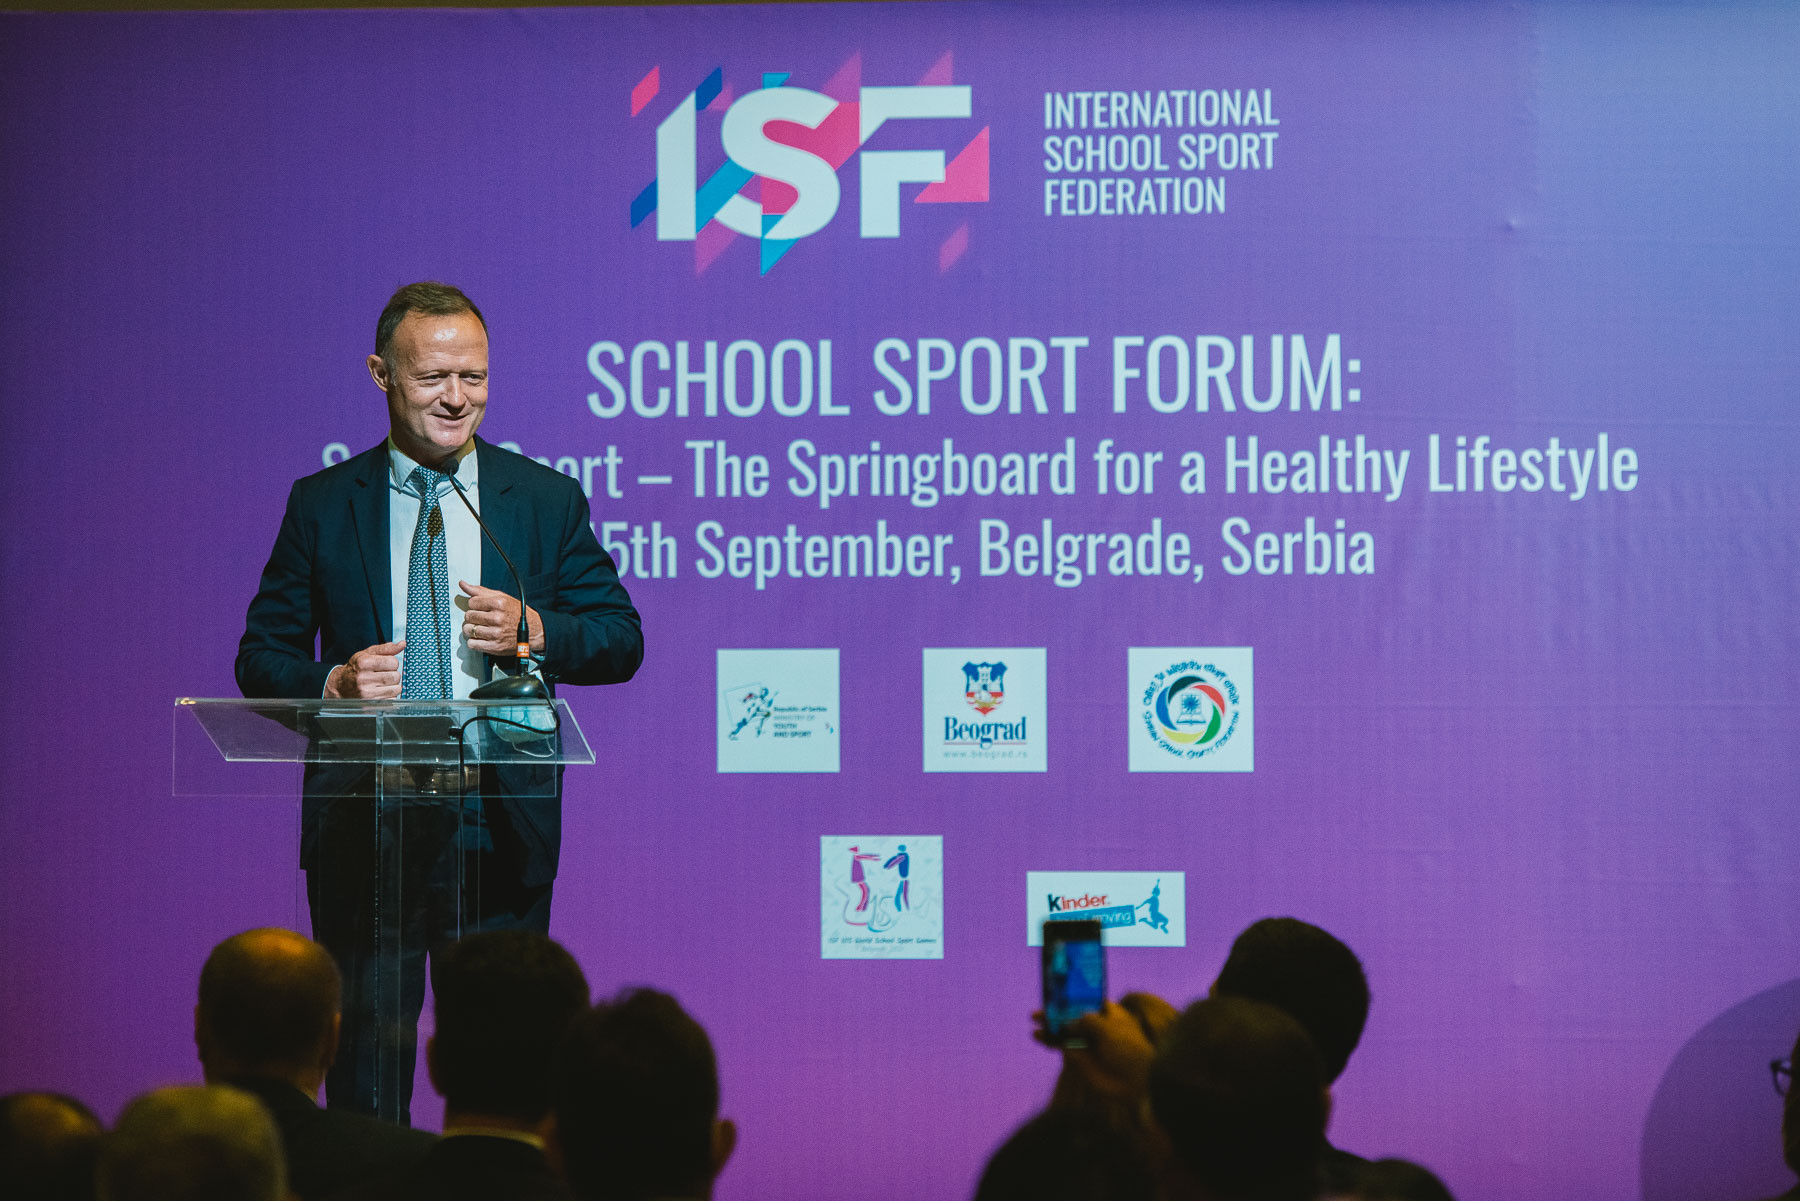 ISF Gymnasiade 2022 to feature Fun and Skills Zone to help ingrain key values